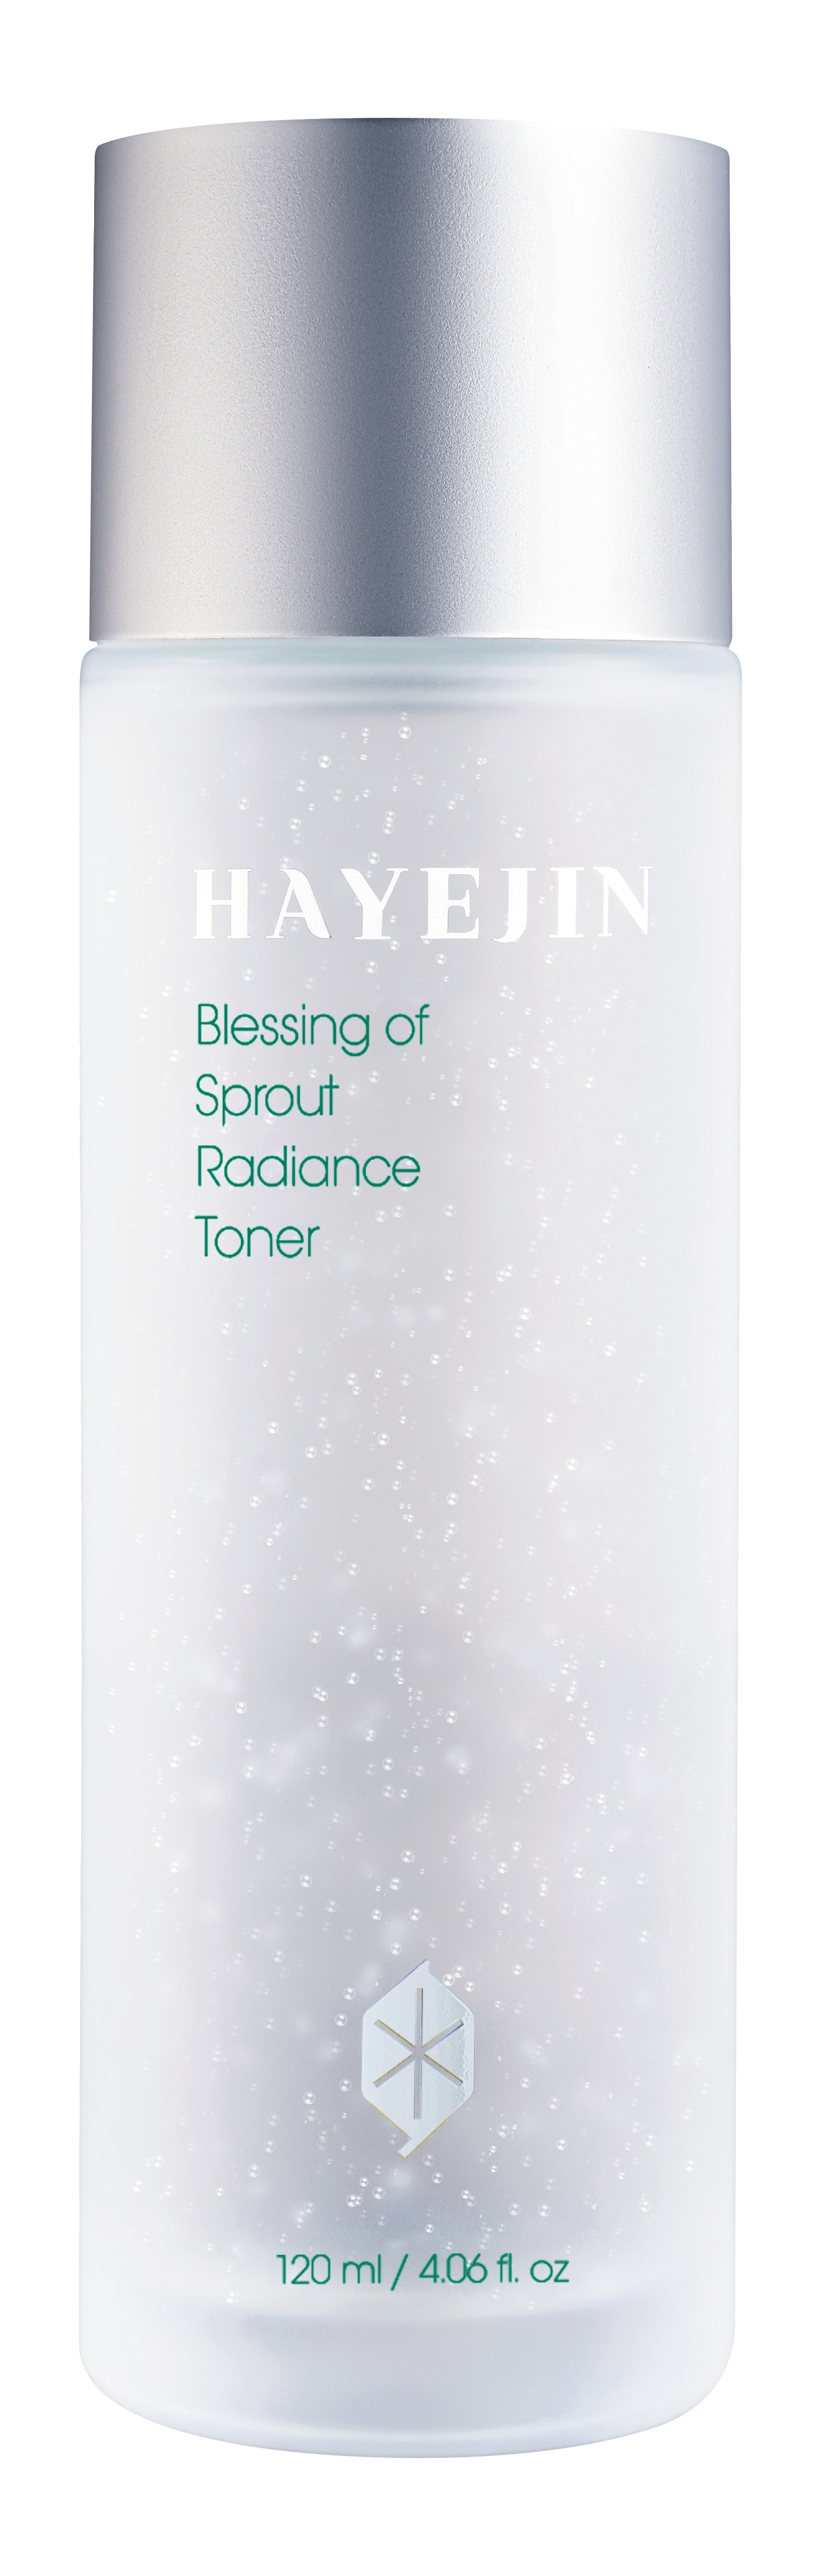 Hayejin Blessing Of Sprout Radiance Toner